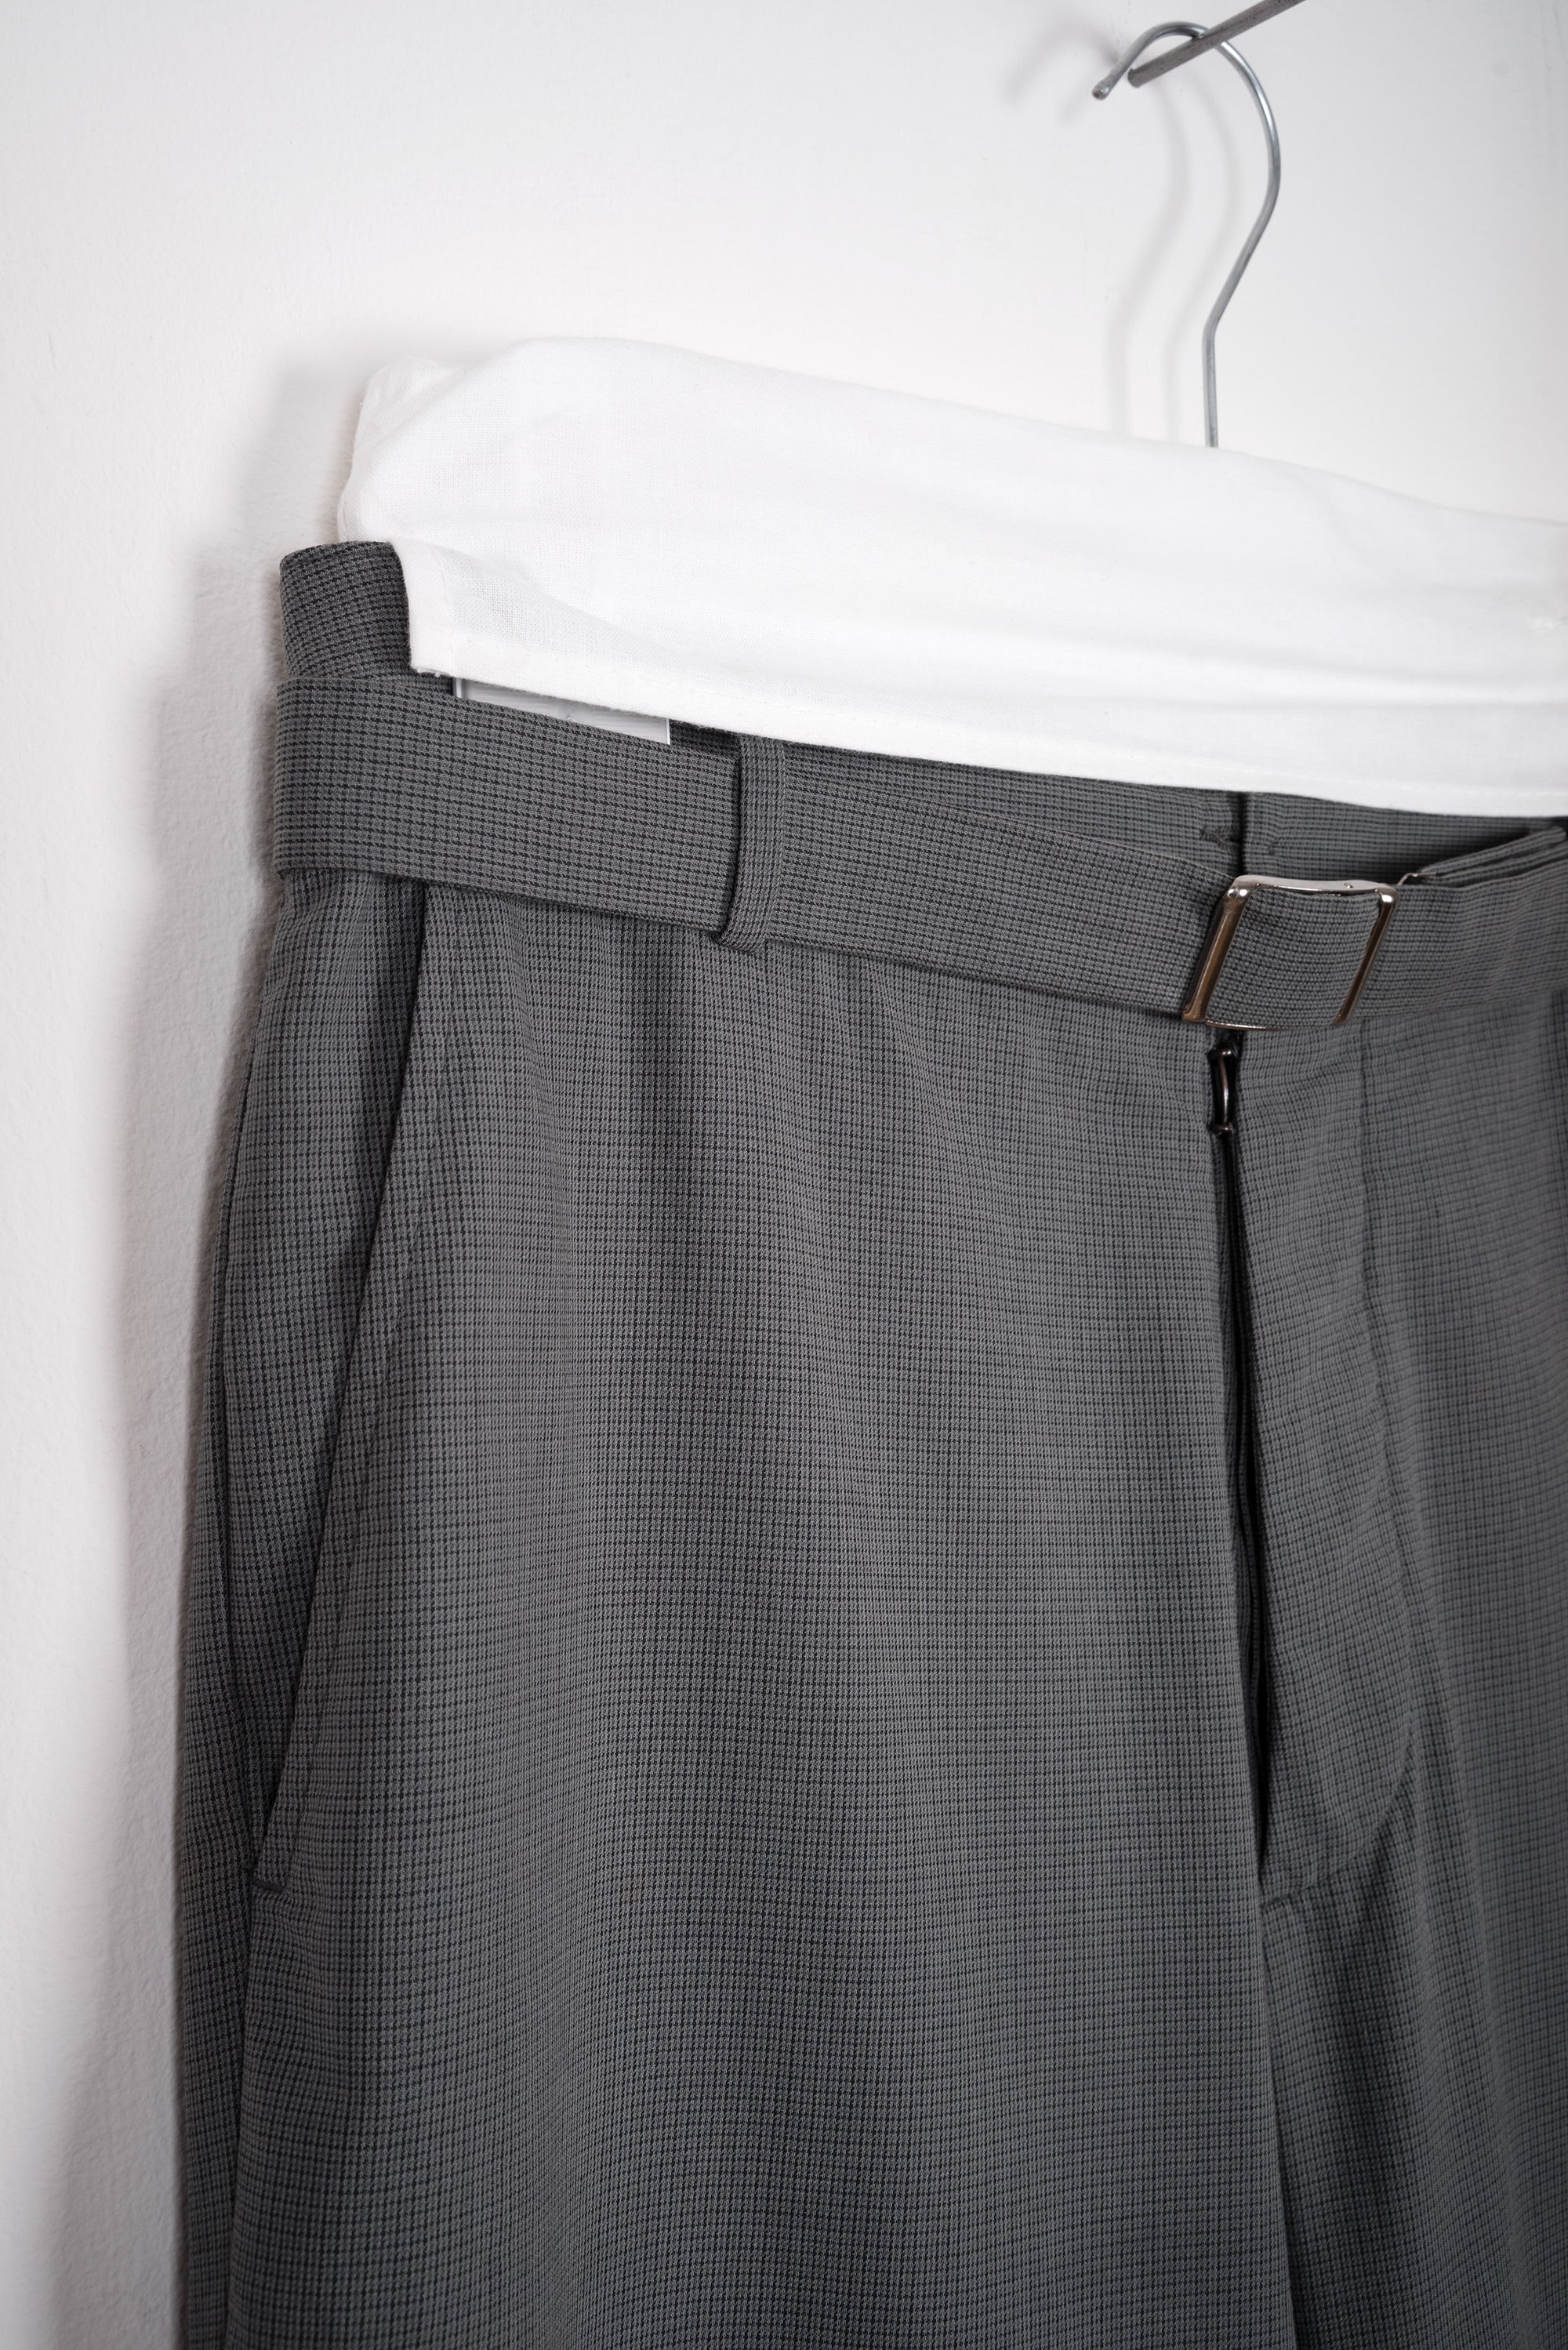 2000 S/S ANATOMIC WIDE CUT TROUSERS WITH MATCHING BELT